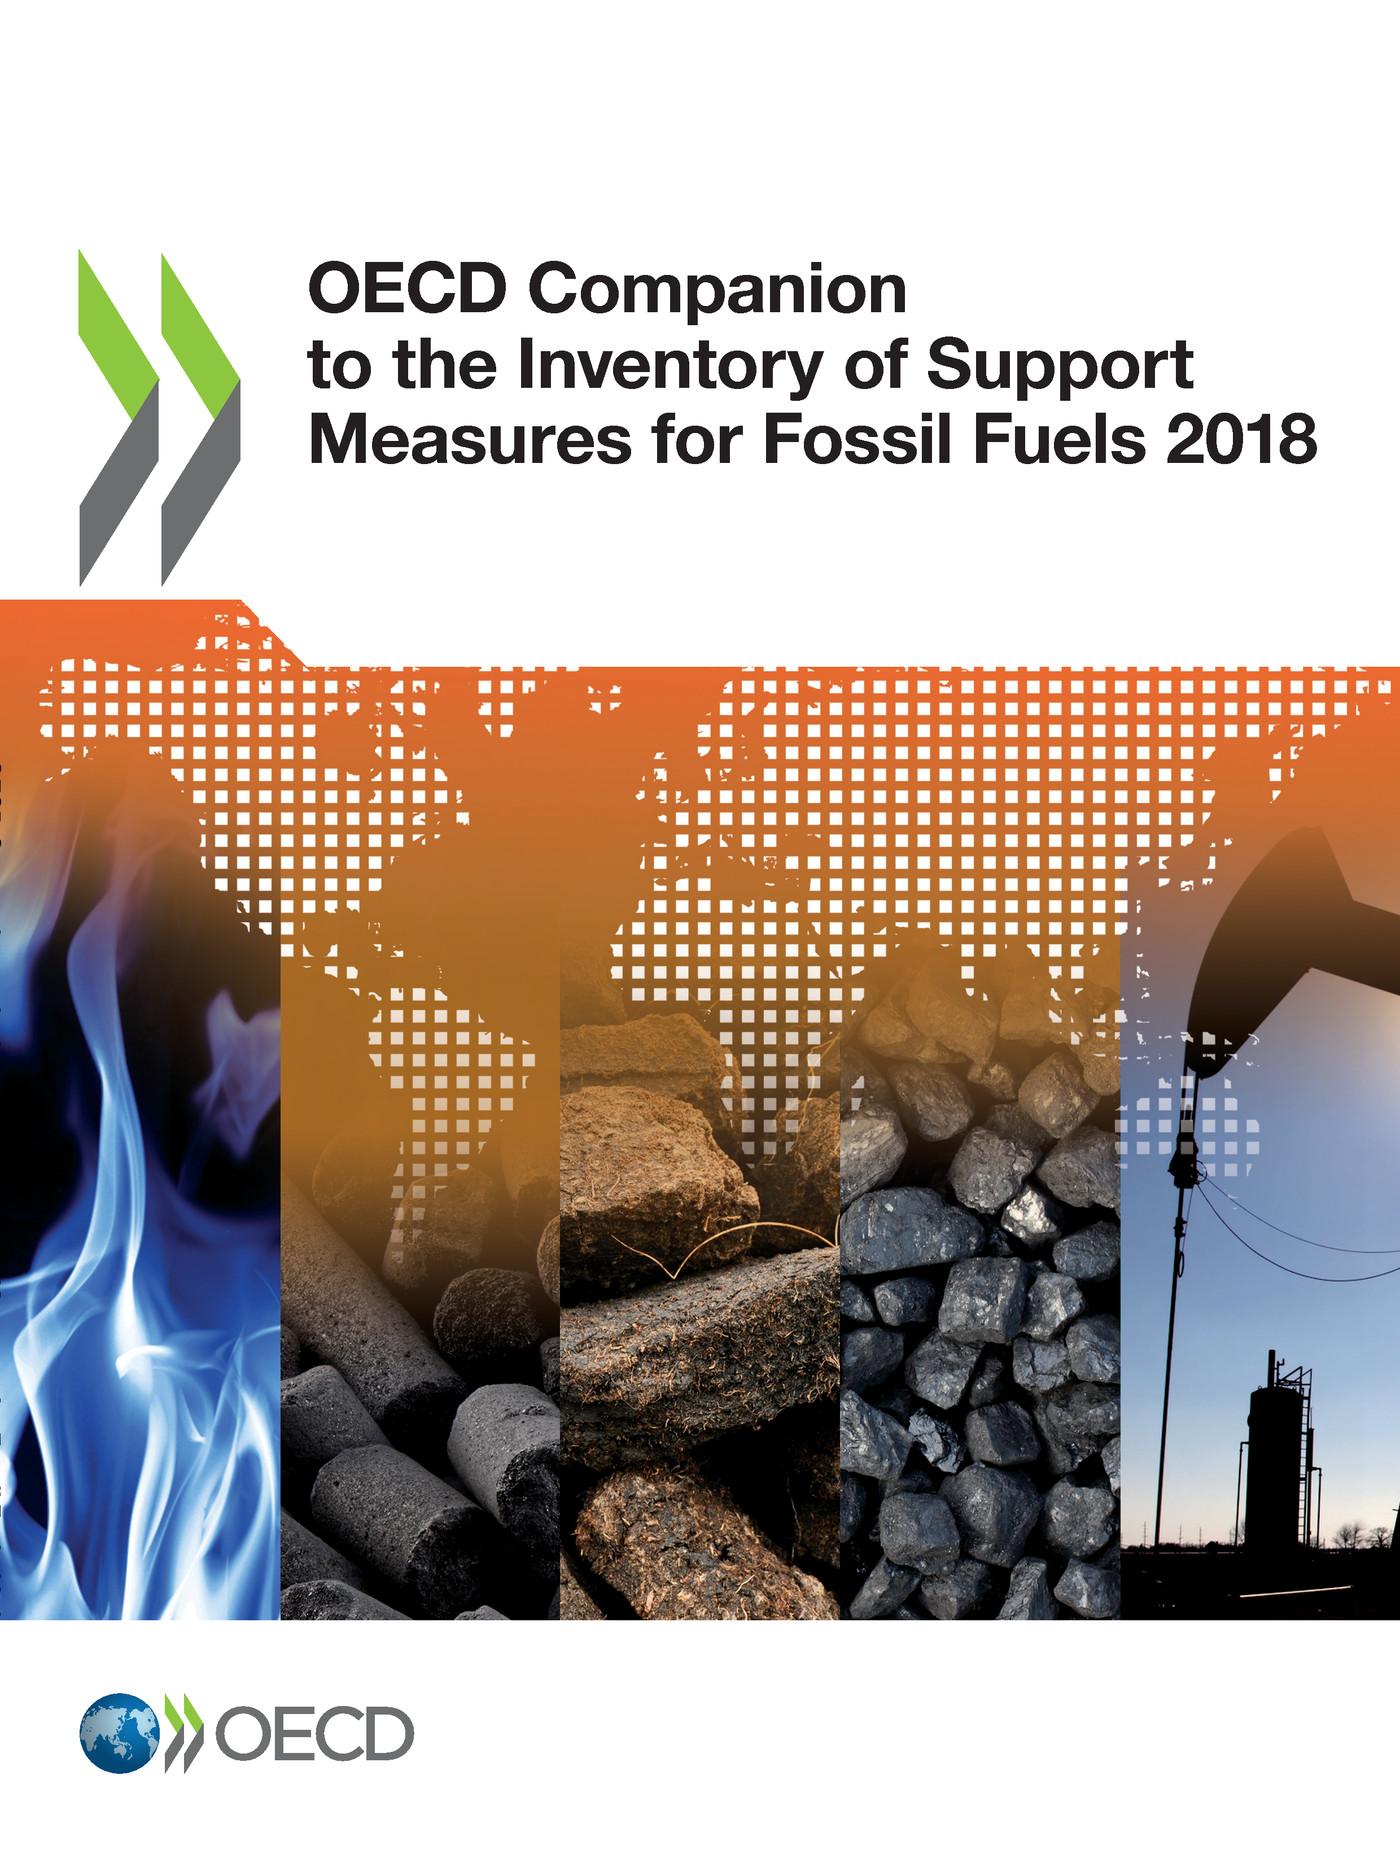 OECD Companion to the Inventory of Support Measures for Fossil Fuels 2018 -  Collectif - OCDE / OECD